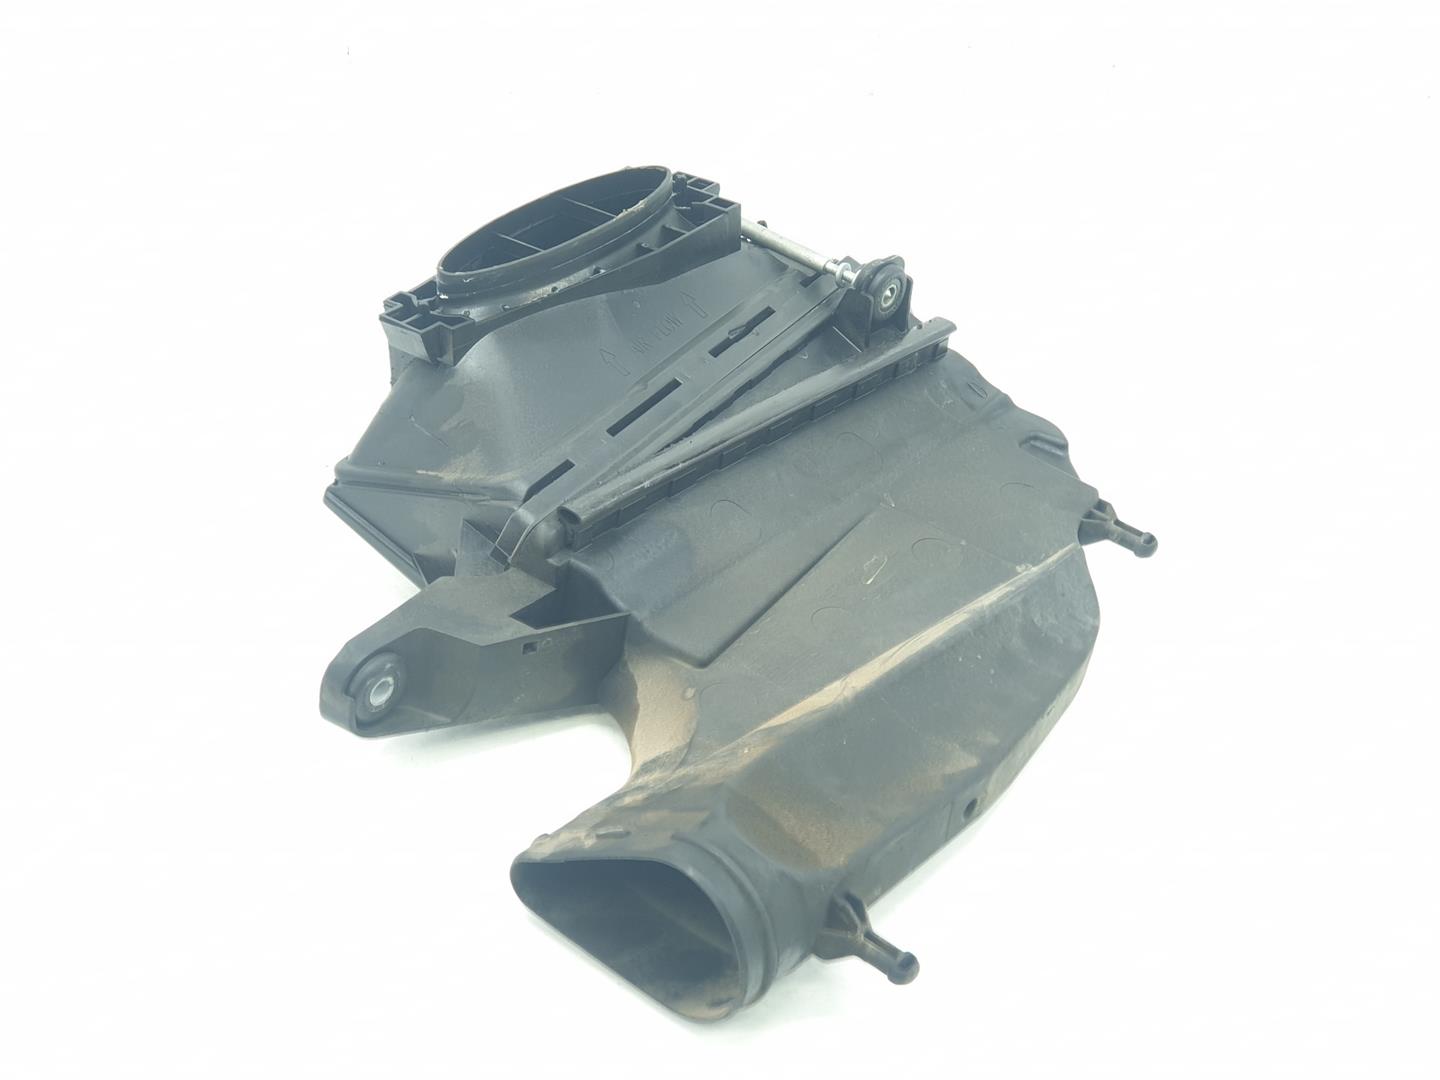 MERCEDES-BENZ M-Class W164 (2005-2011) Other Engine Compartment Parts A6420903601, A6420903601 24242142